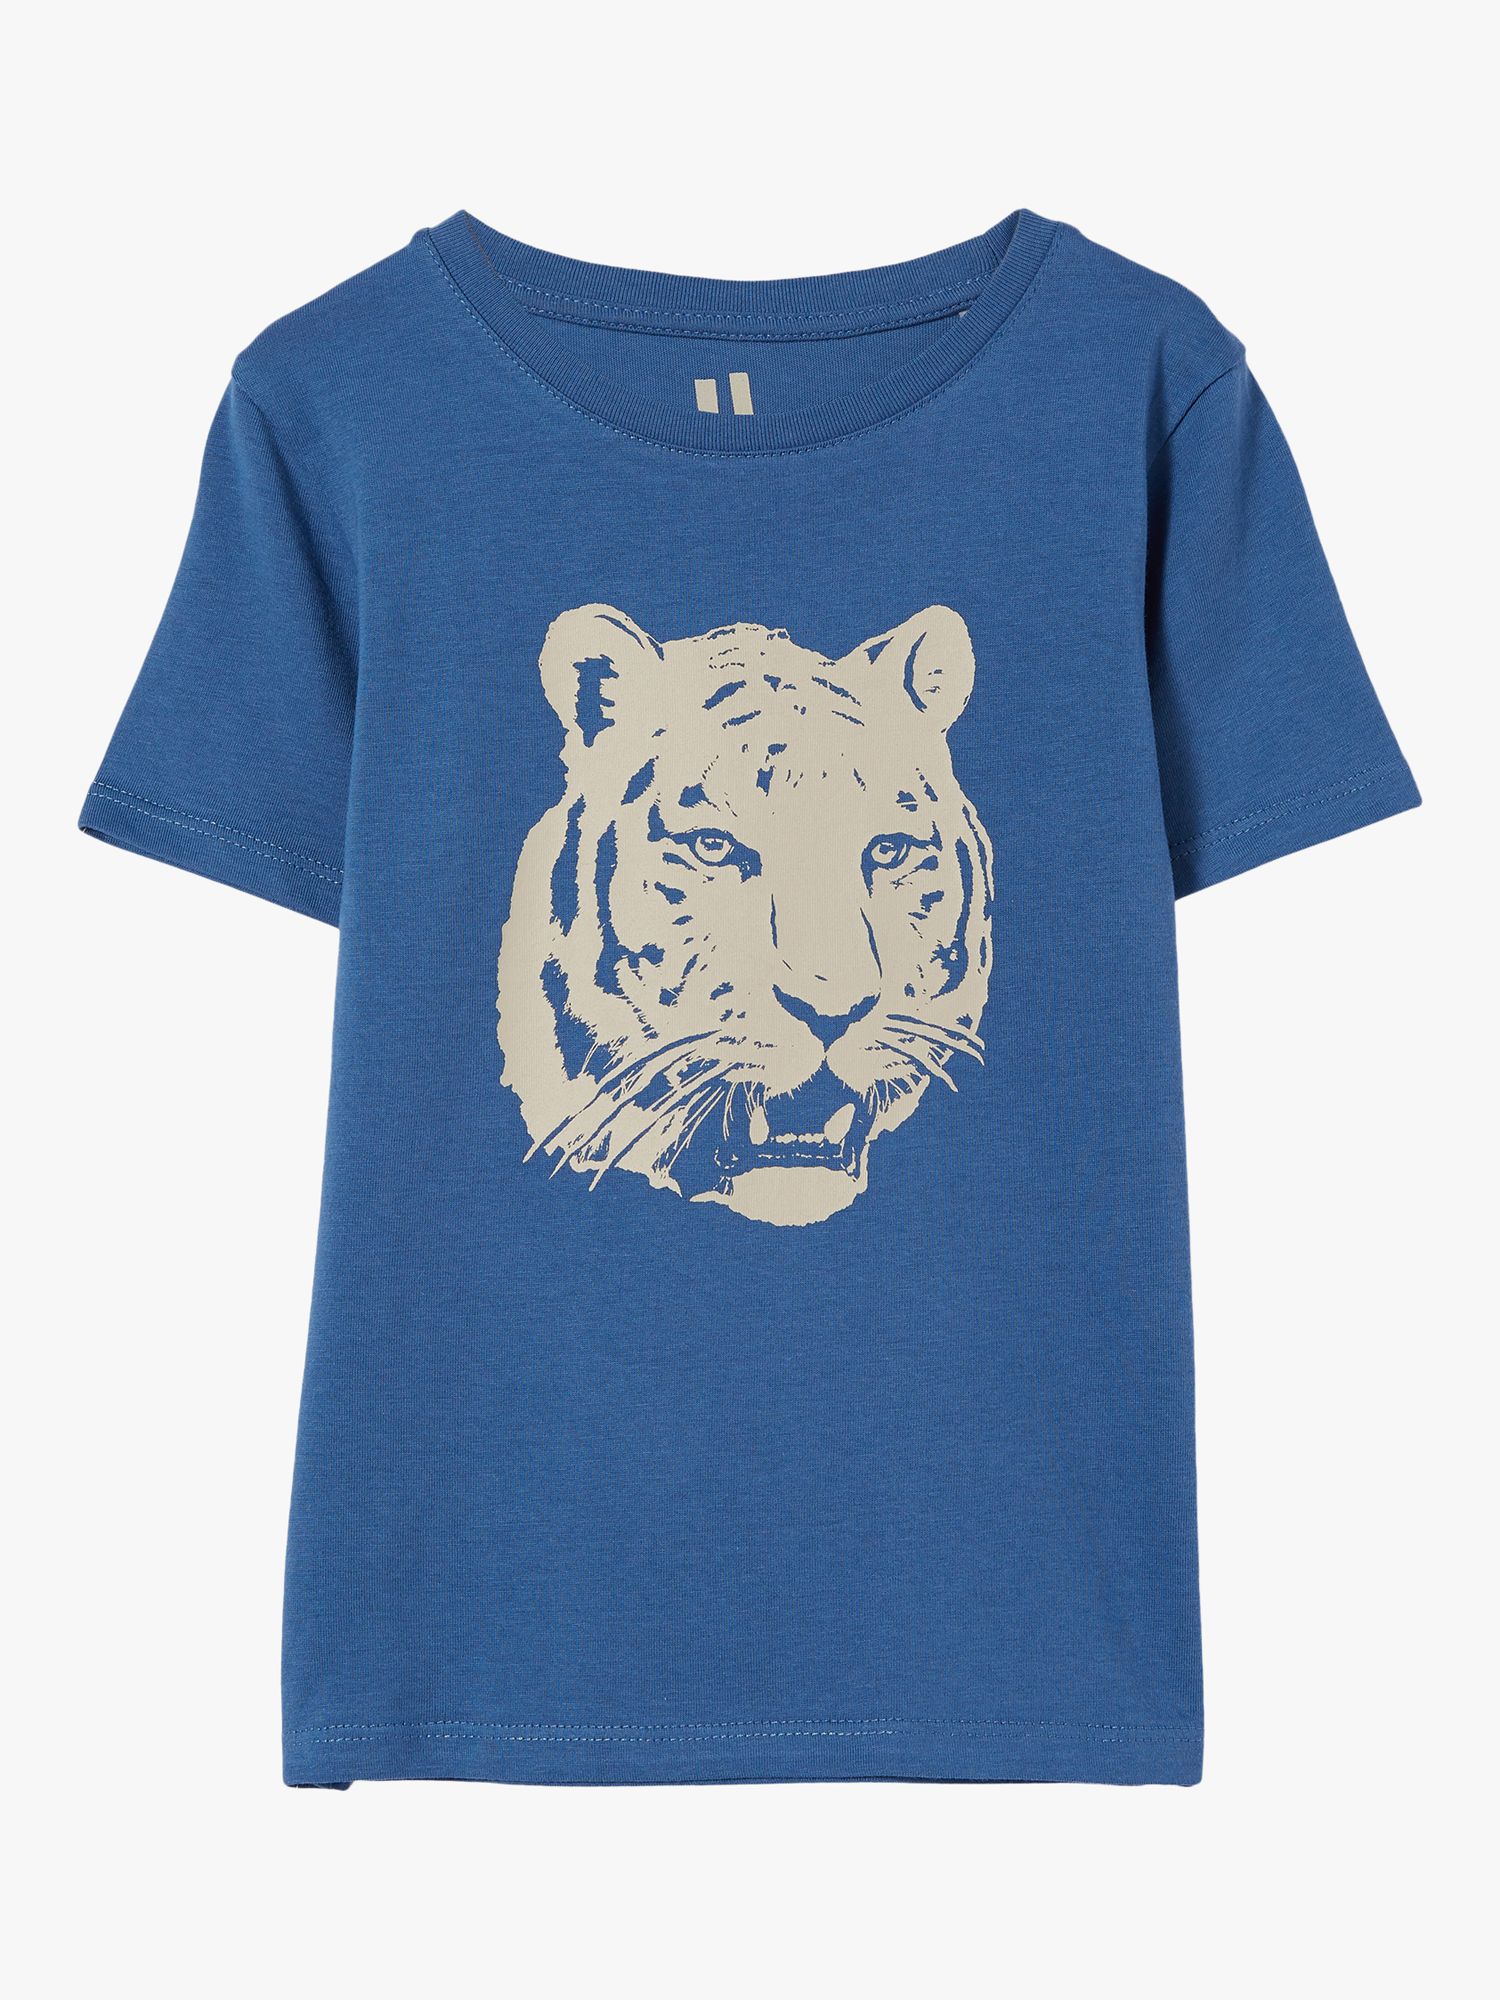 Cotton On Kids' Max Tiger Short Sleeve T-Shirt, Blue 3 years unisex 100% cotton